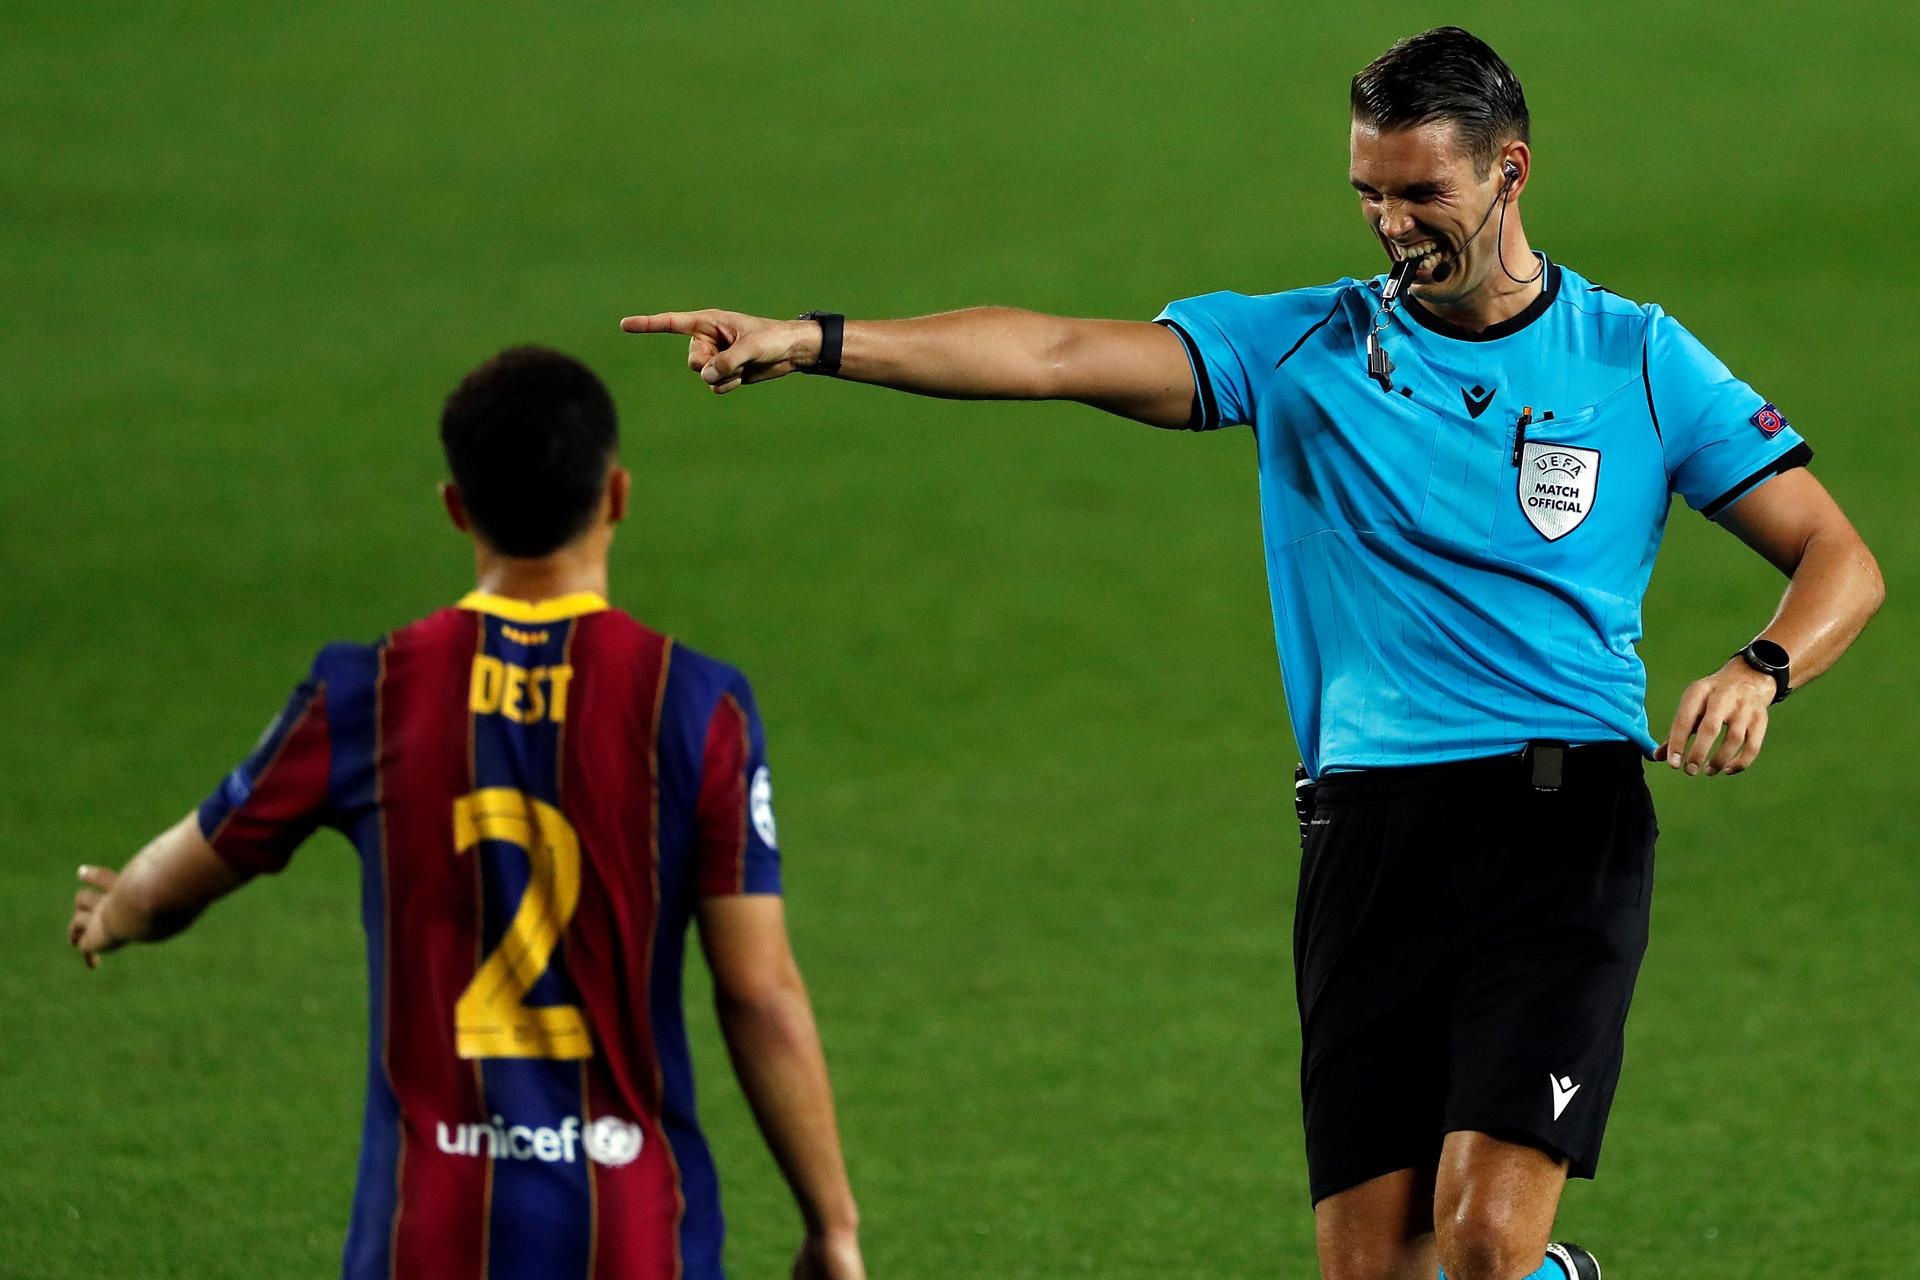 Scharer to referee the European Super Cup